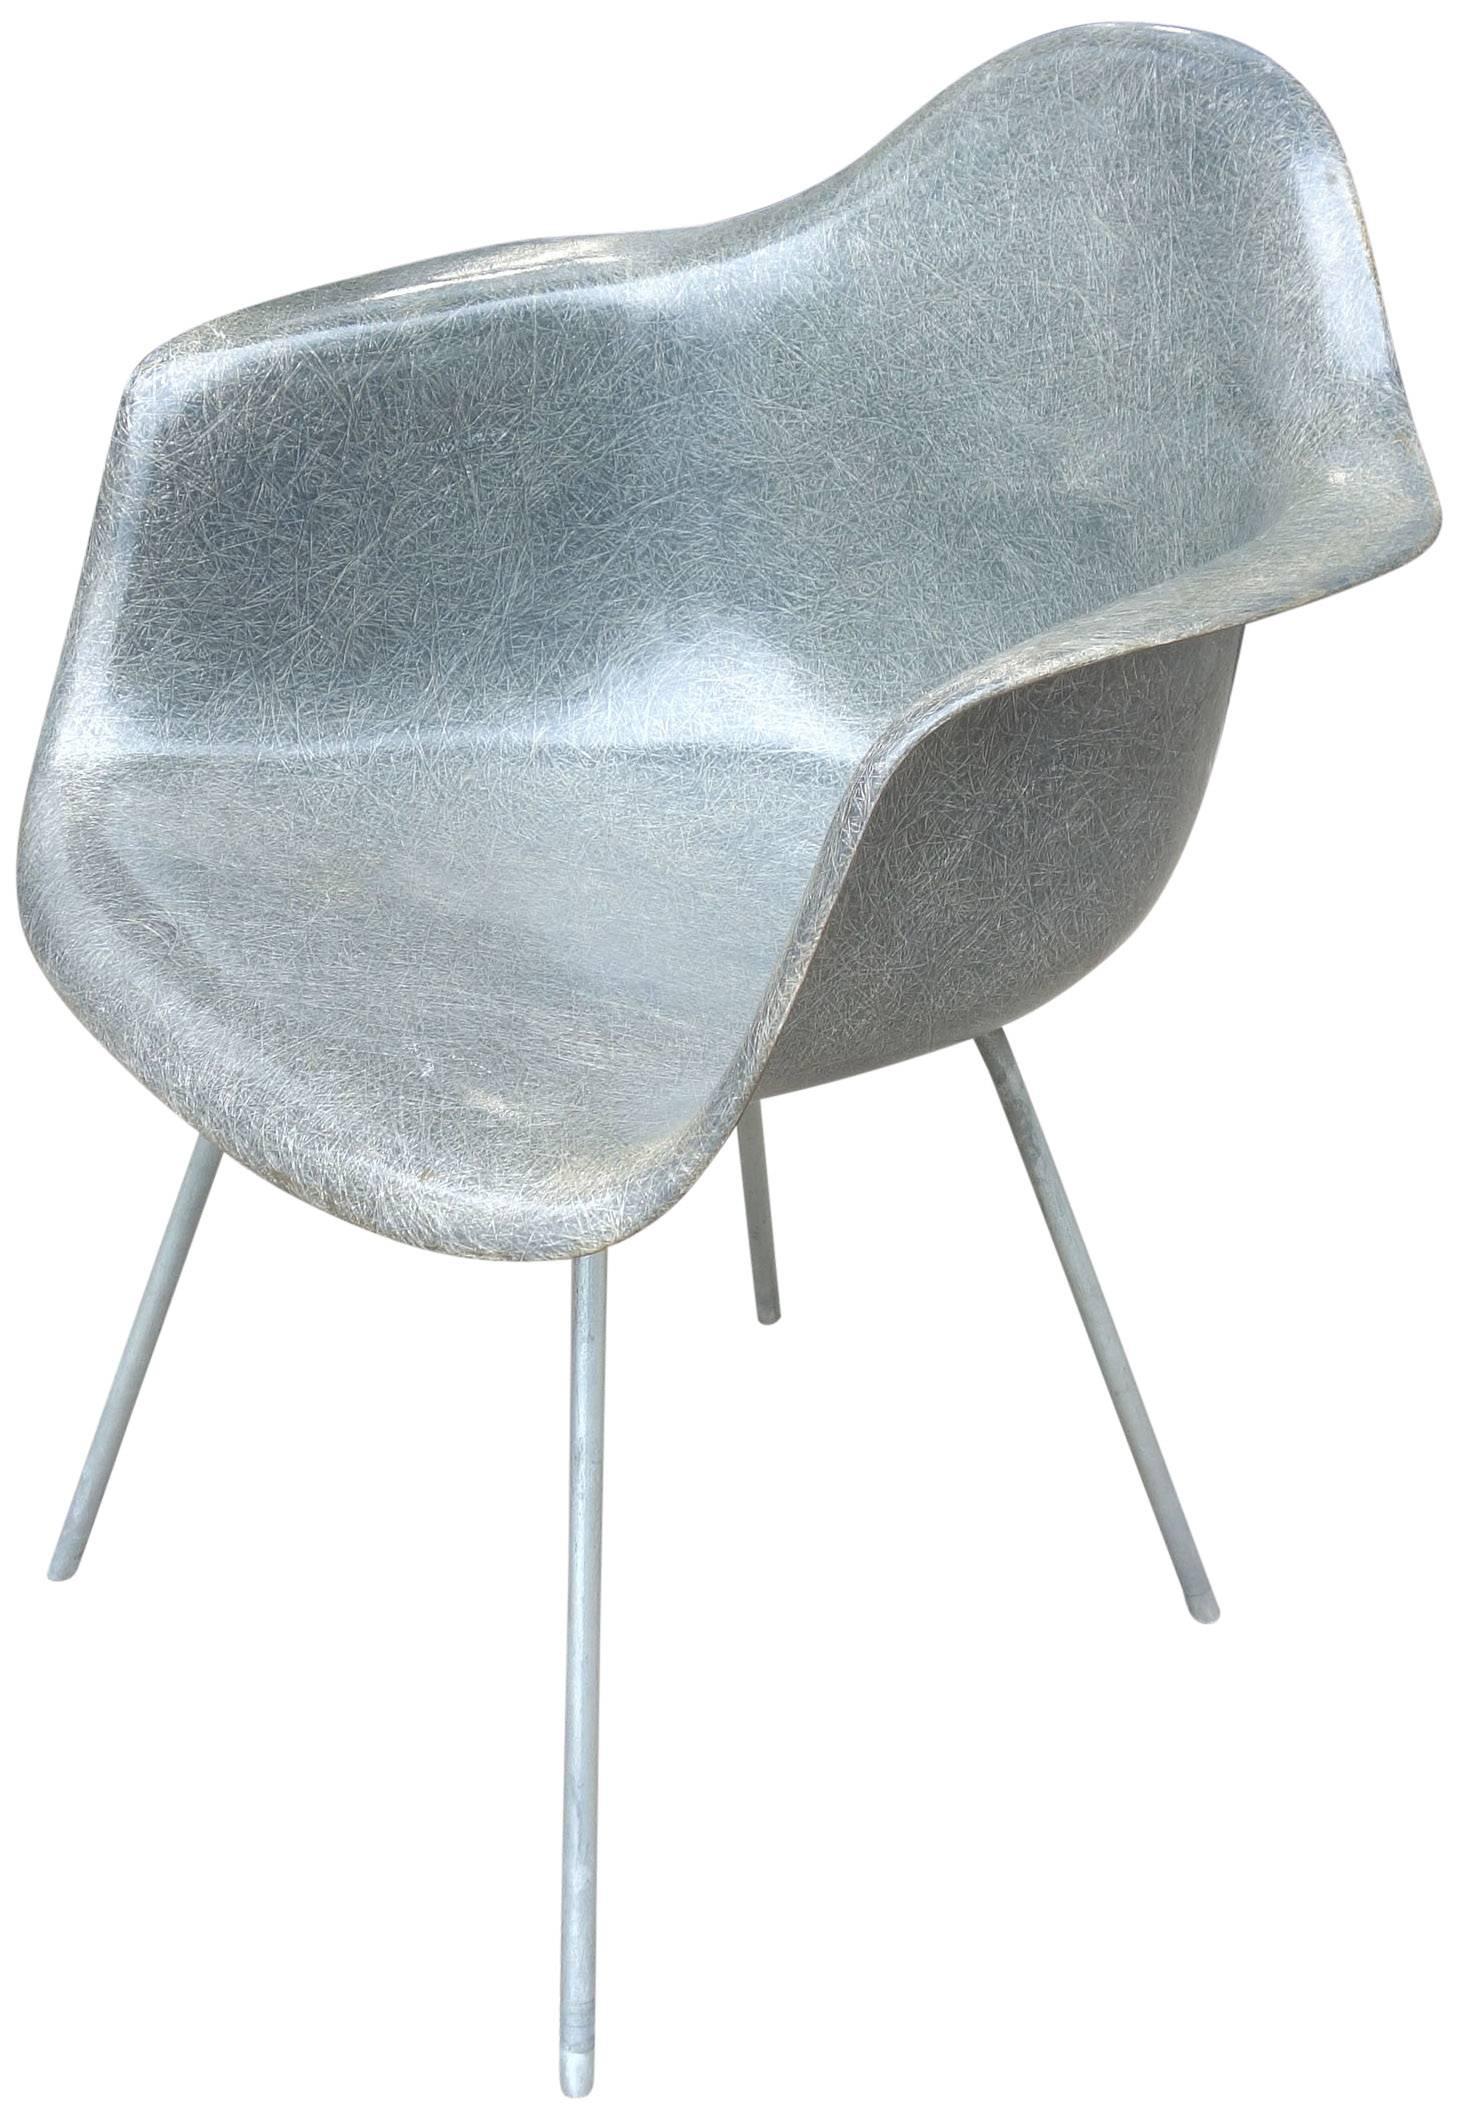 Midcentury Eames for Herman Miller fiberglass armchair elephant hide grey rope edge. Features an even beautiful grain with a lighter almost seafoam color in the light. retains original Zenith label. A must for any midcentury collector.